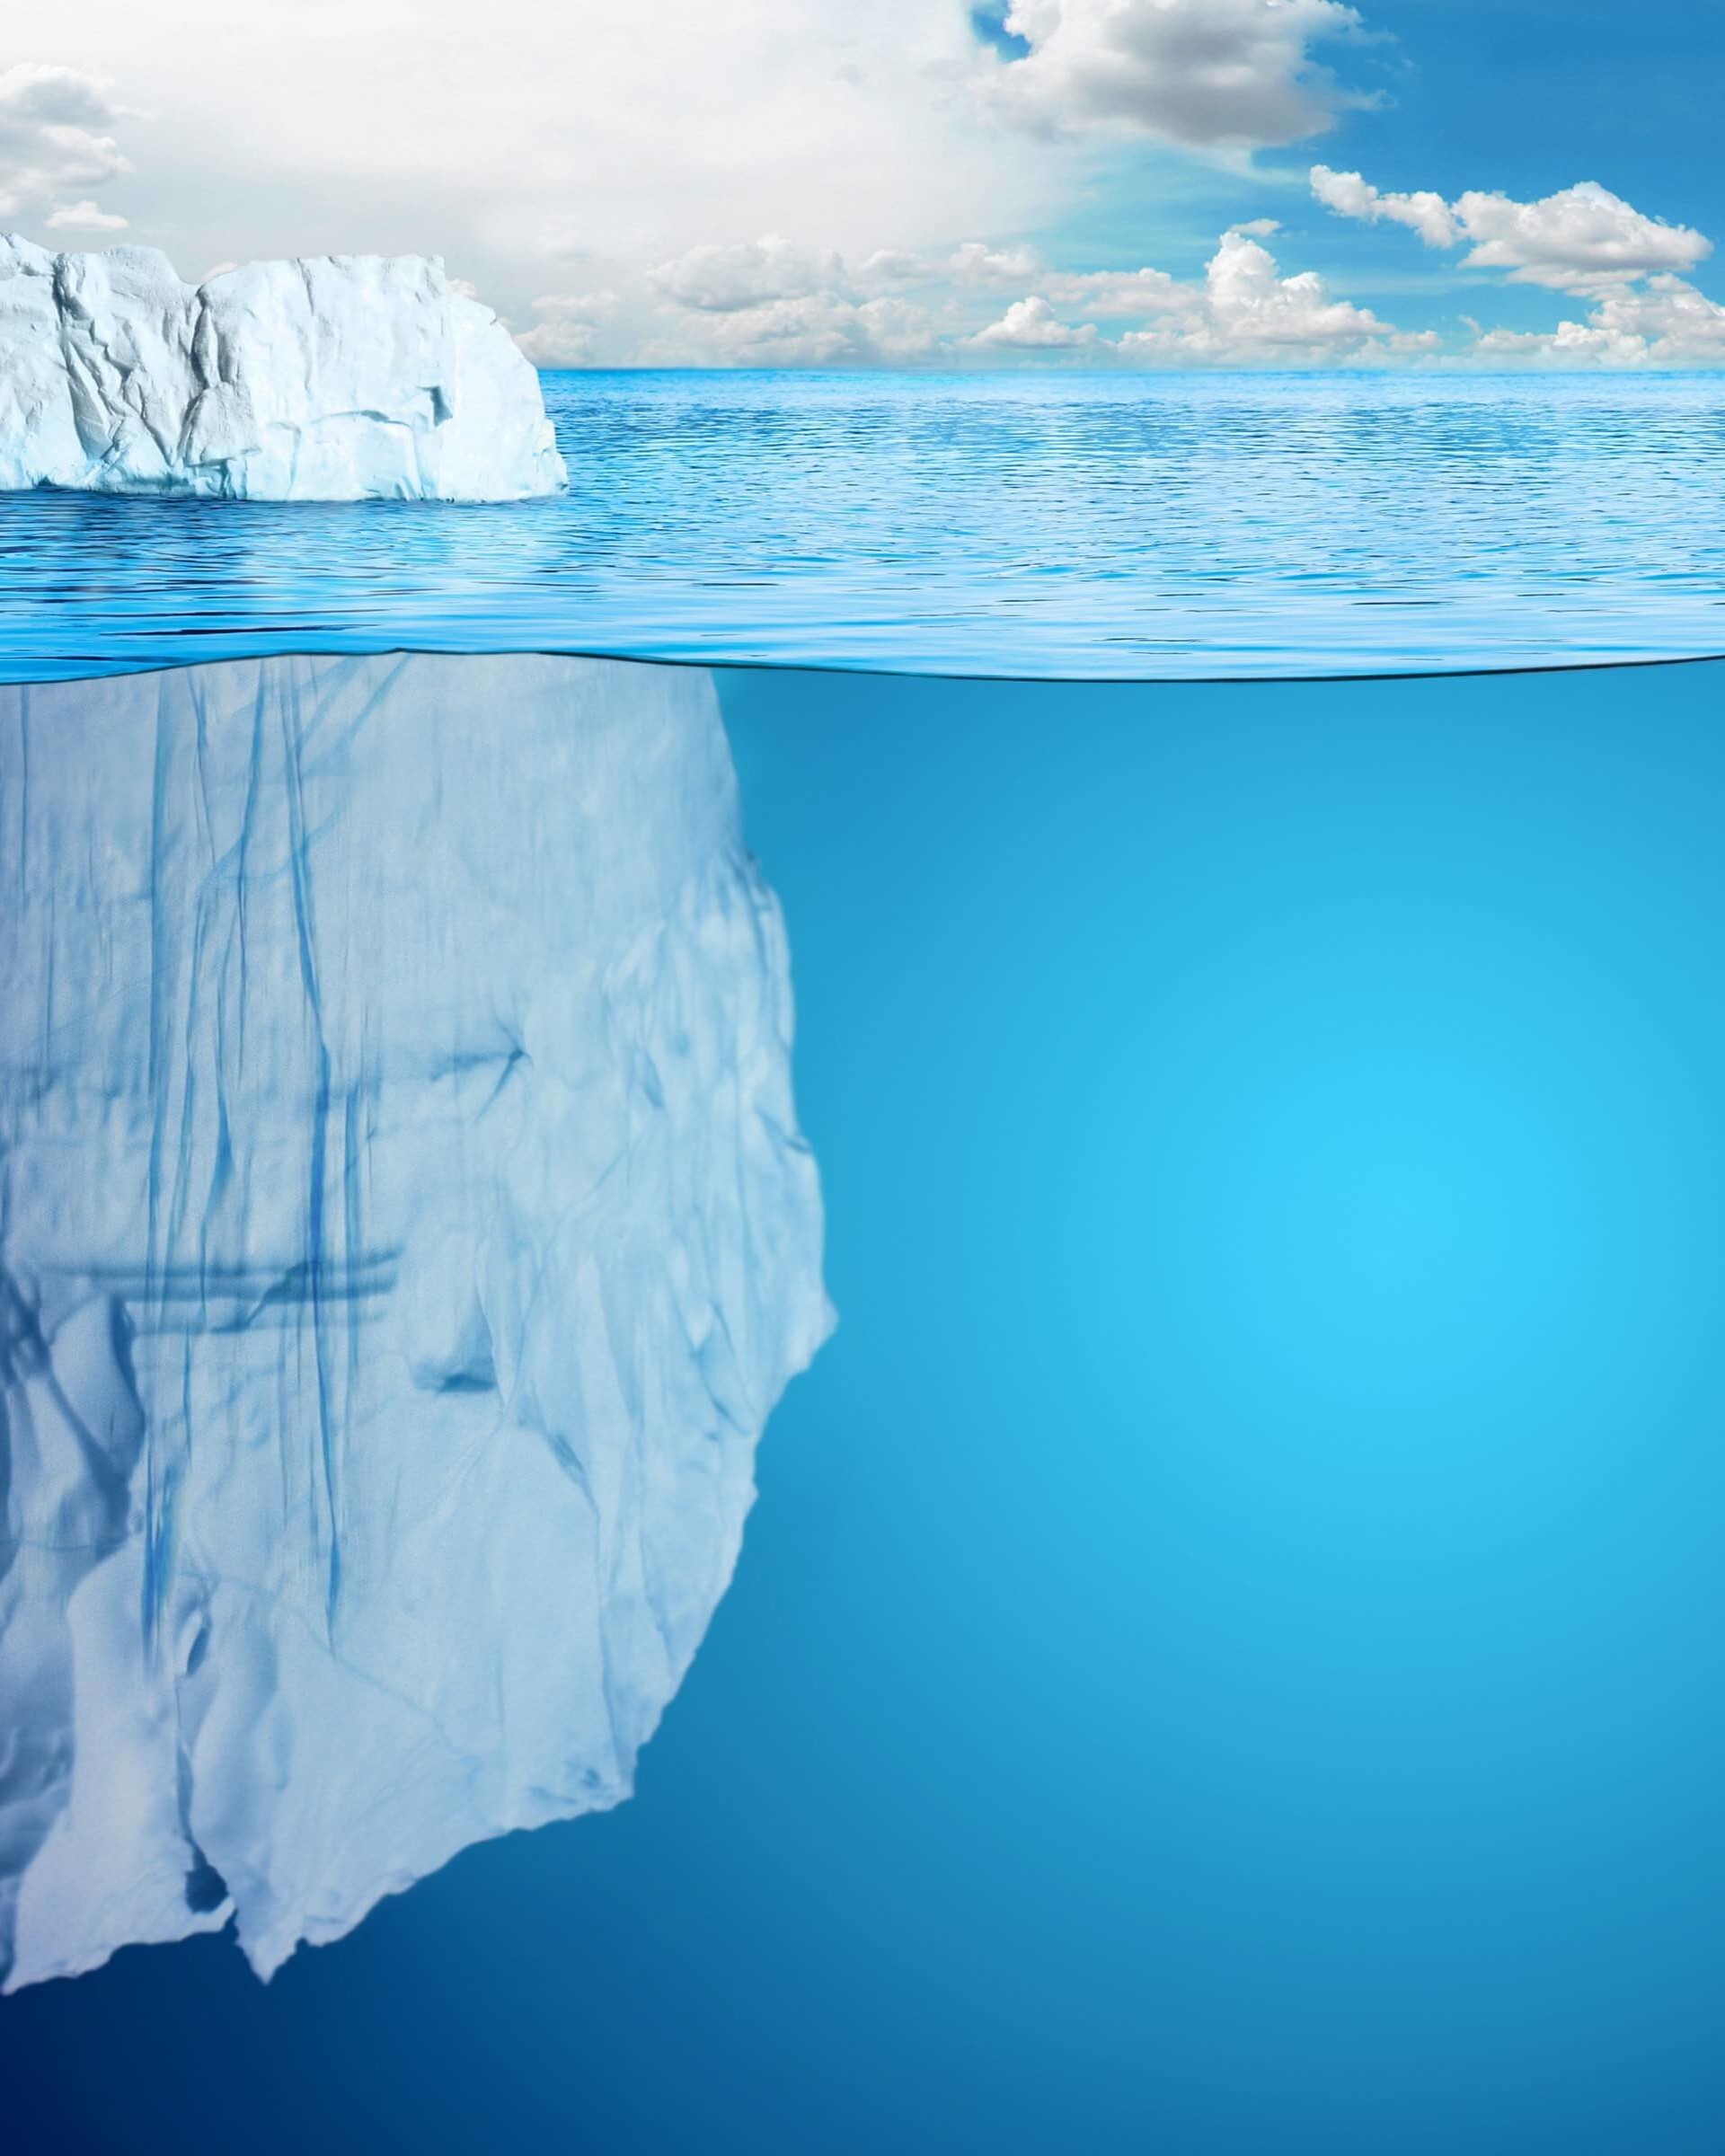 The invisible part of the iceberg Wallpaper for Google Nexus 7